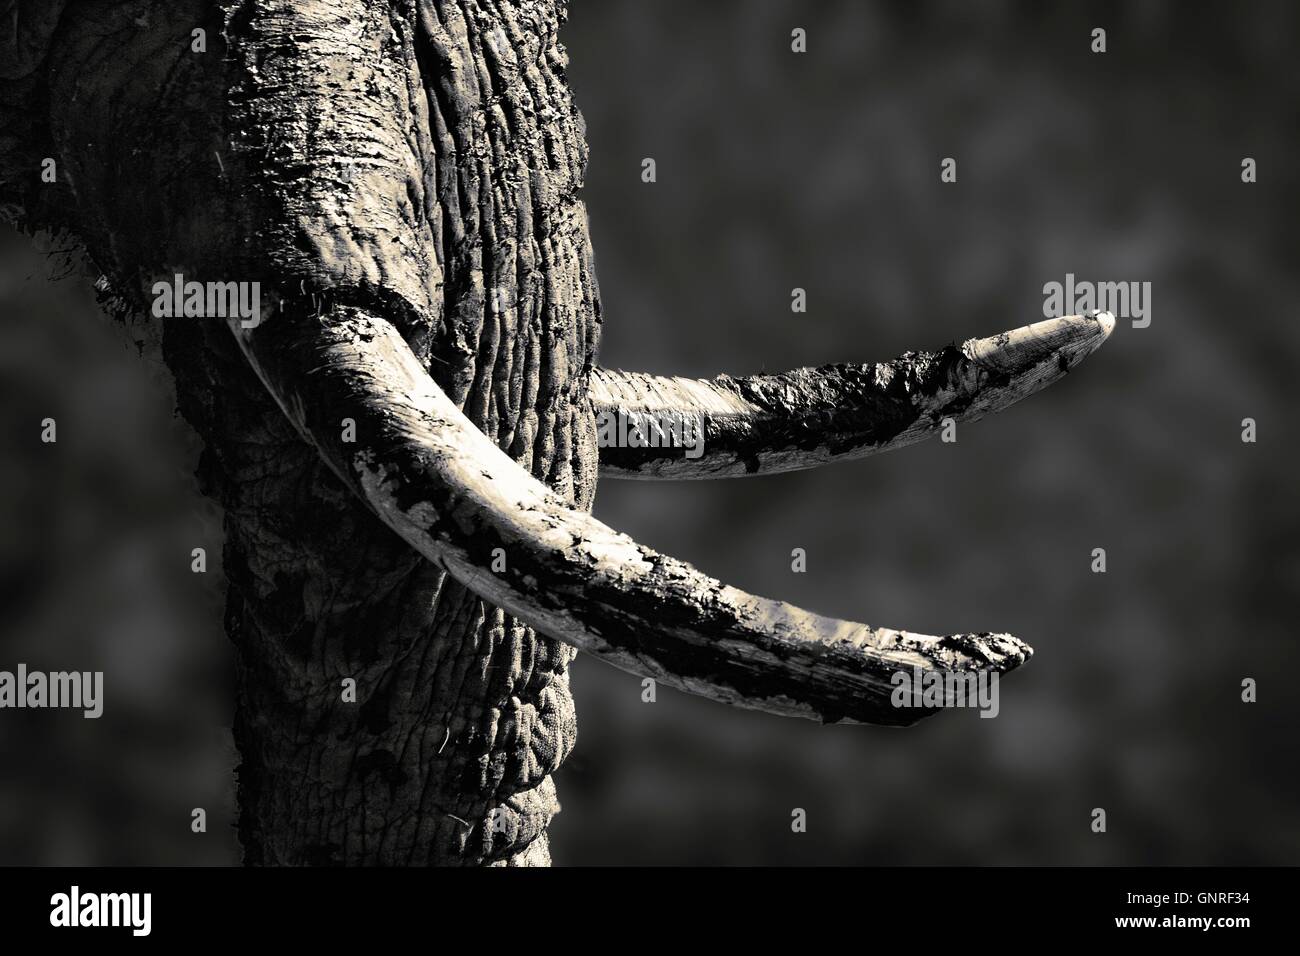 Ivory and Mud, an African Elephant Abstract, Showing Tusks and part of Trunk. Monochrome Stock Photo